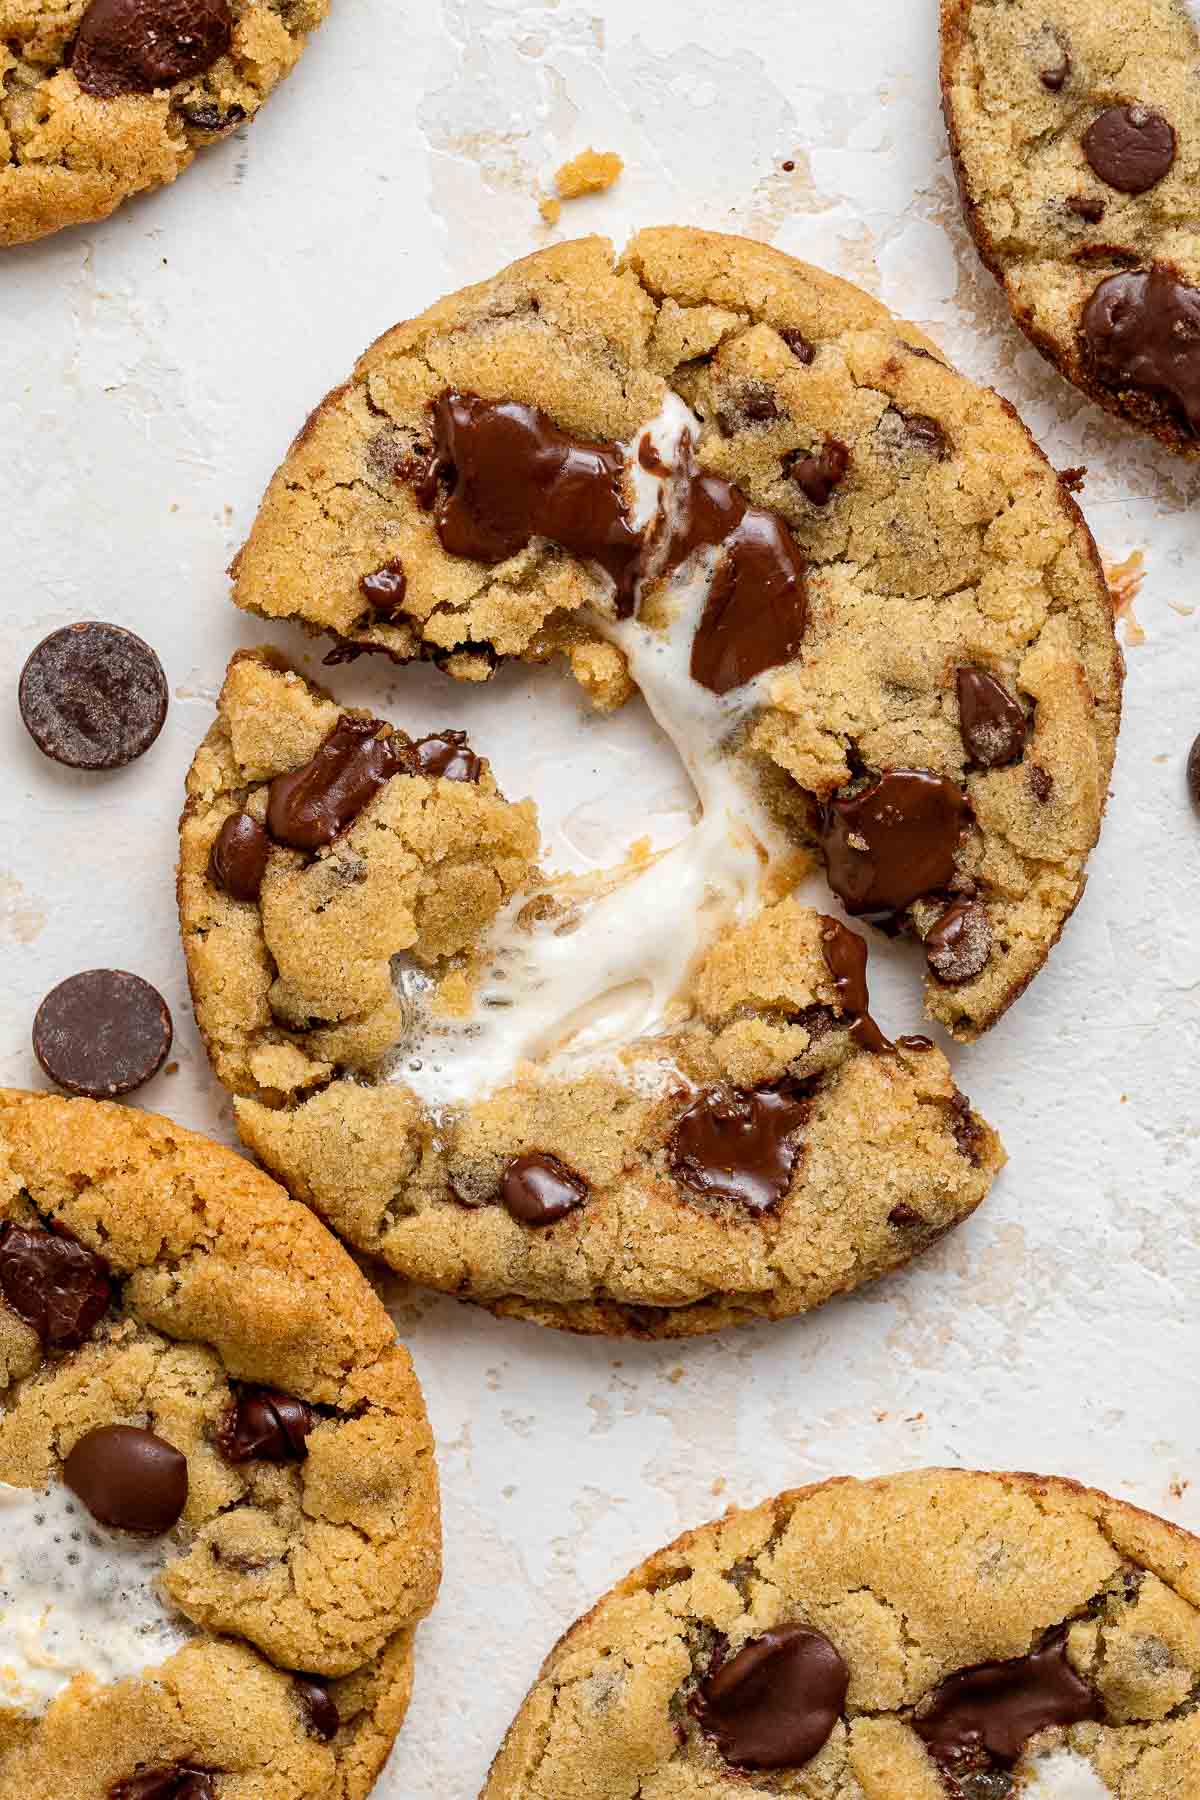 Chocolate chip cookie ripped in the center with gooey center showing.